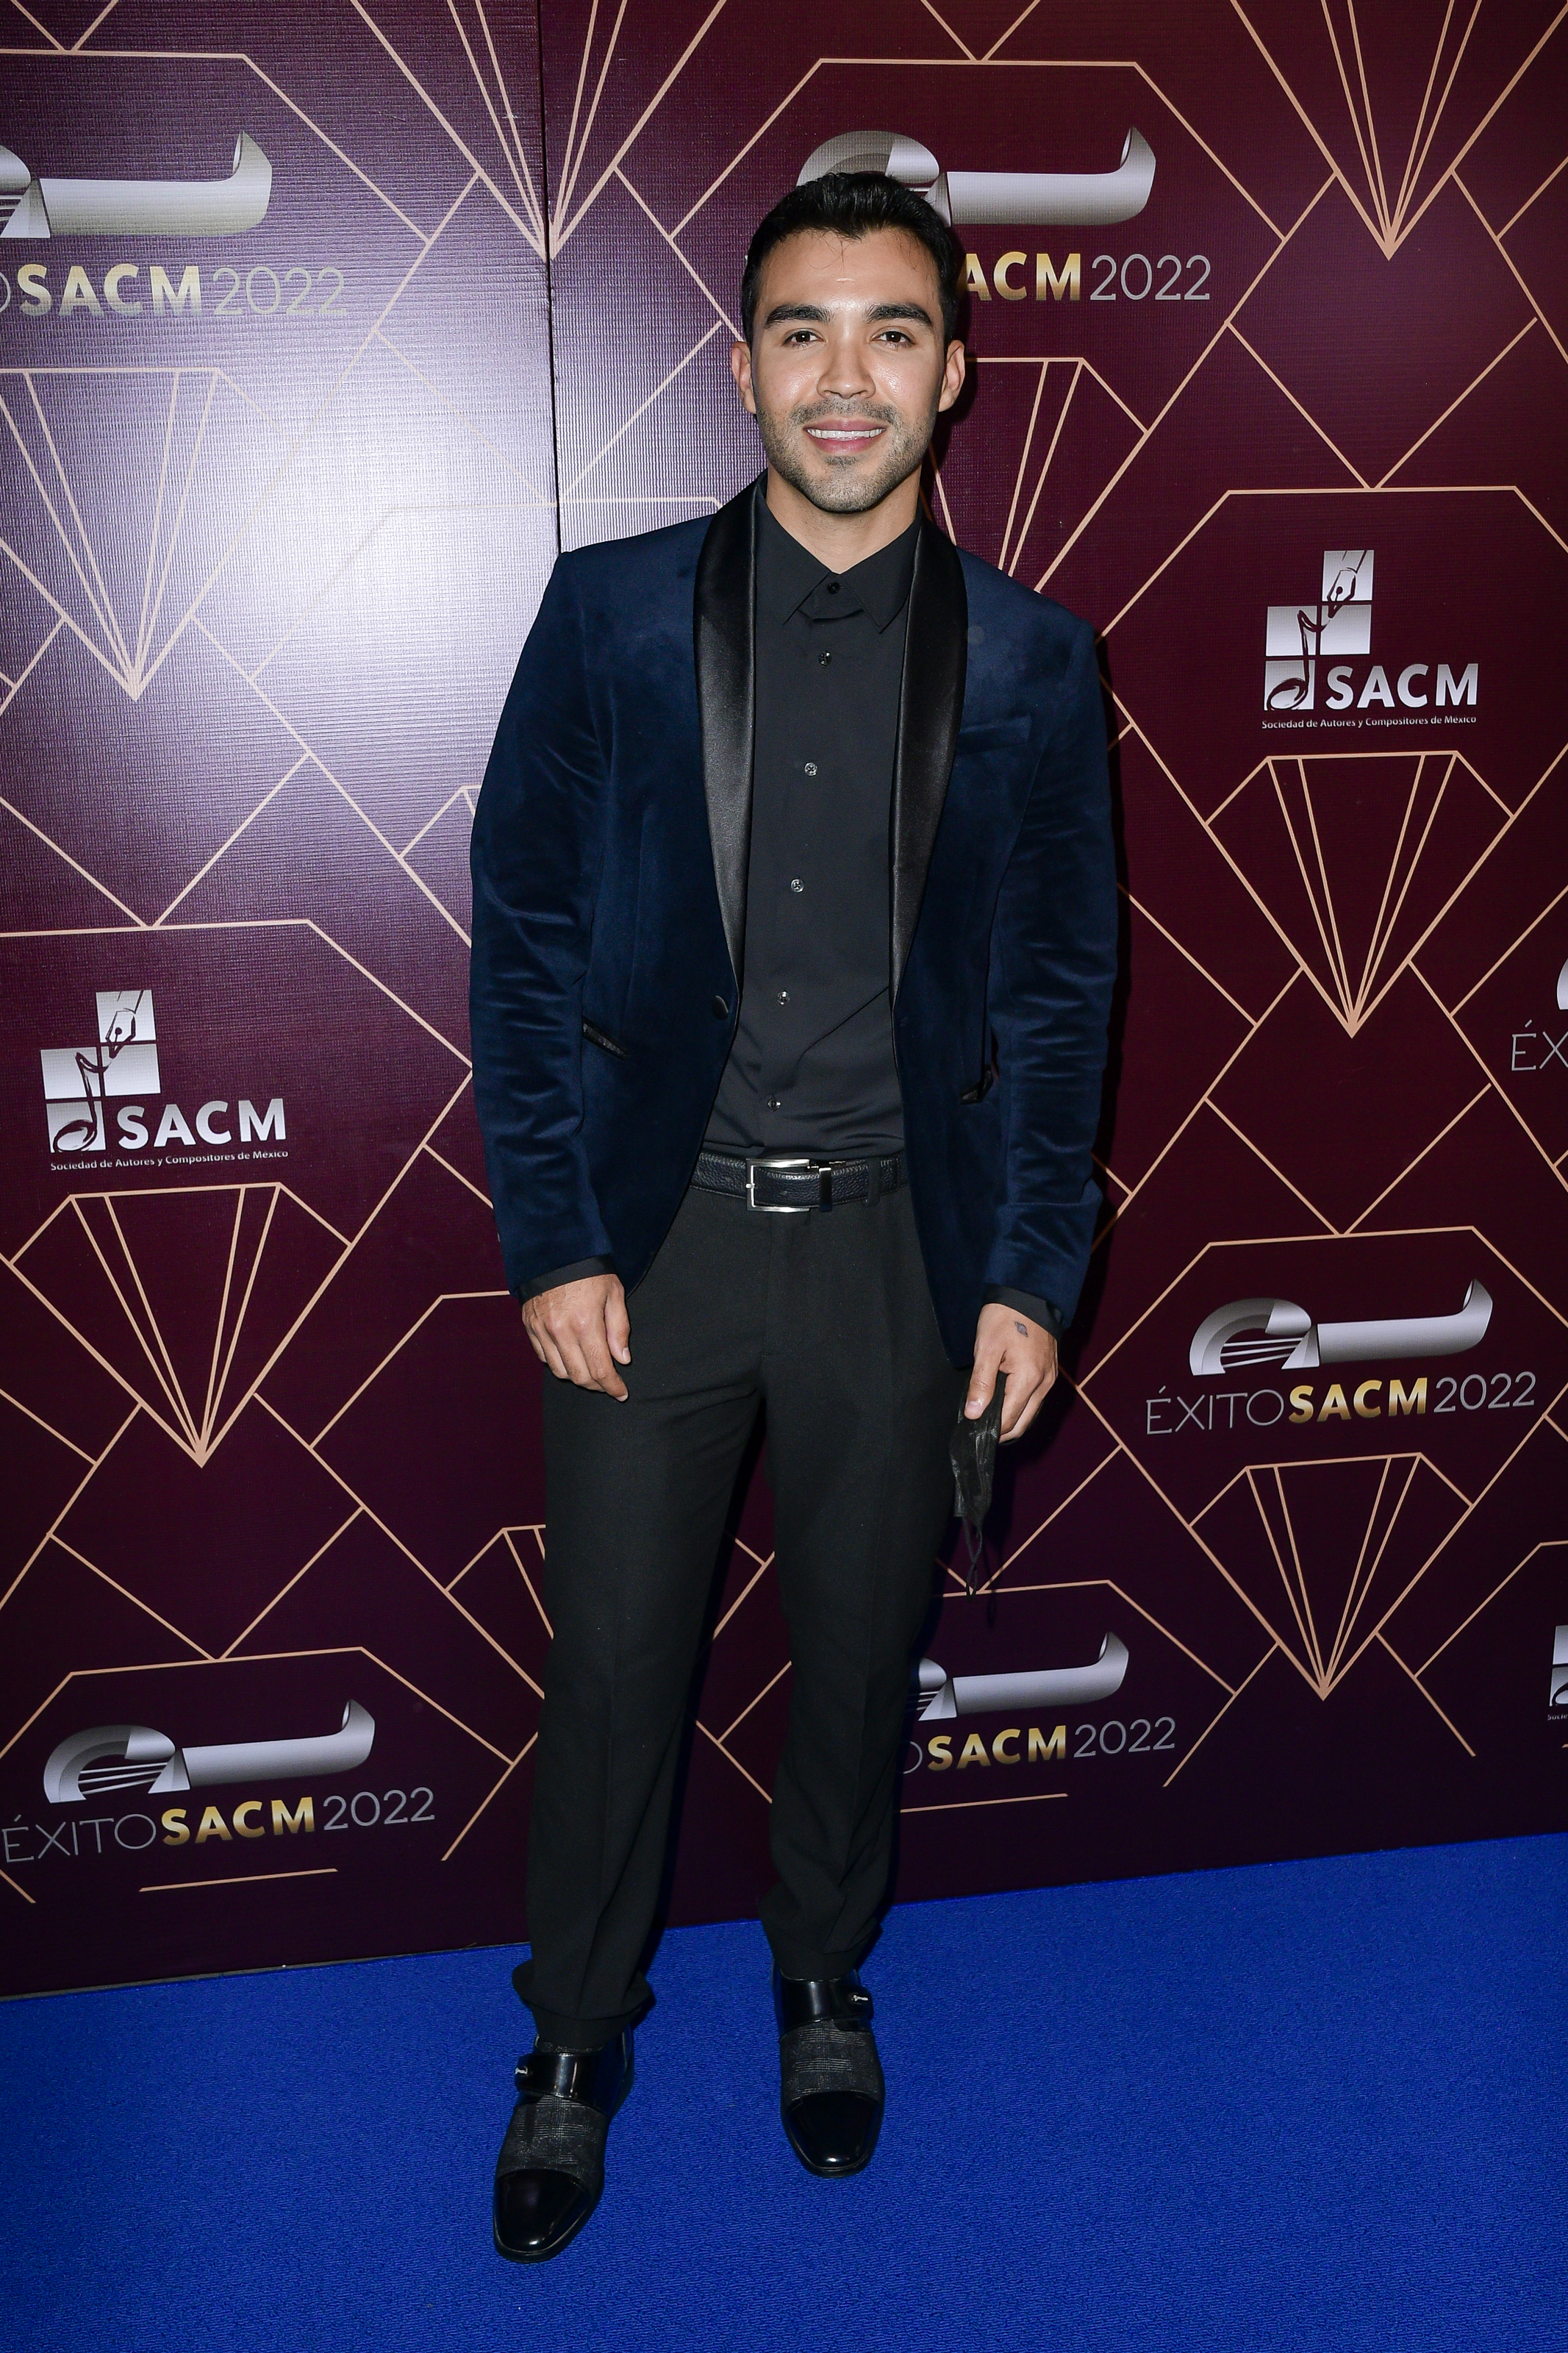 Gussy Lau poses for a photo during the Red Carpet of 'Exito SACM 2022 Awards' at Centro Cultural Roberto Cantoral on August 24, 2022, in Mexico City, Mexico. | Source: Getty Images